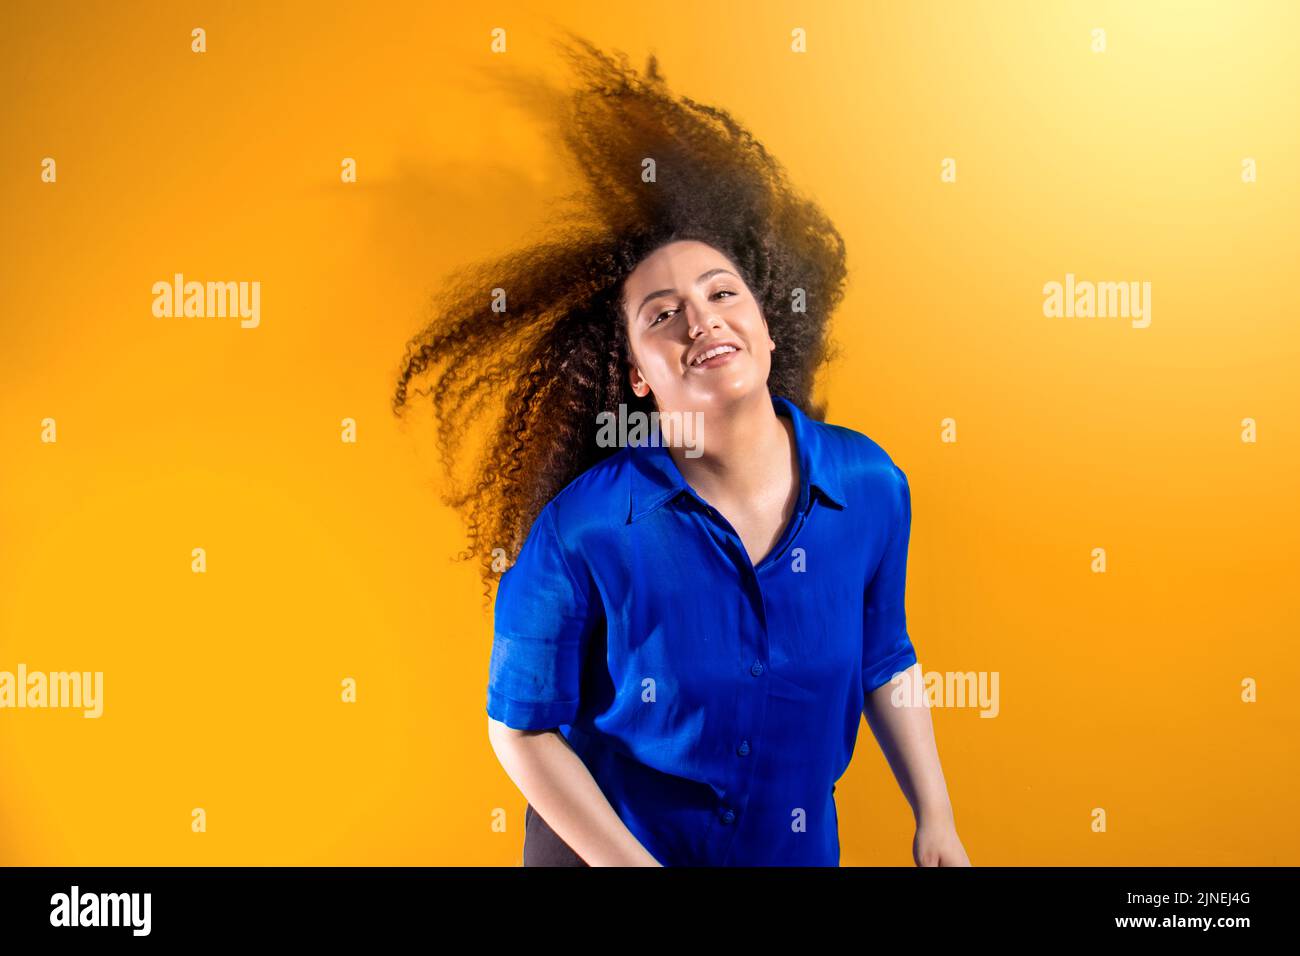 Young girl with afro hair shaking her big hair. Isolated on orange background Stock Photo